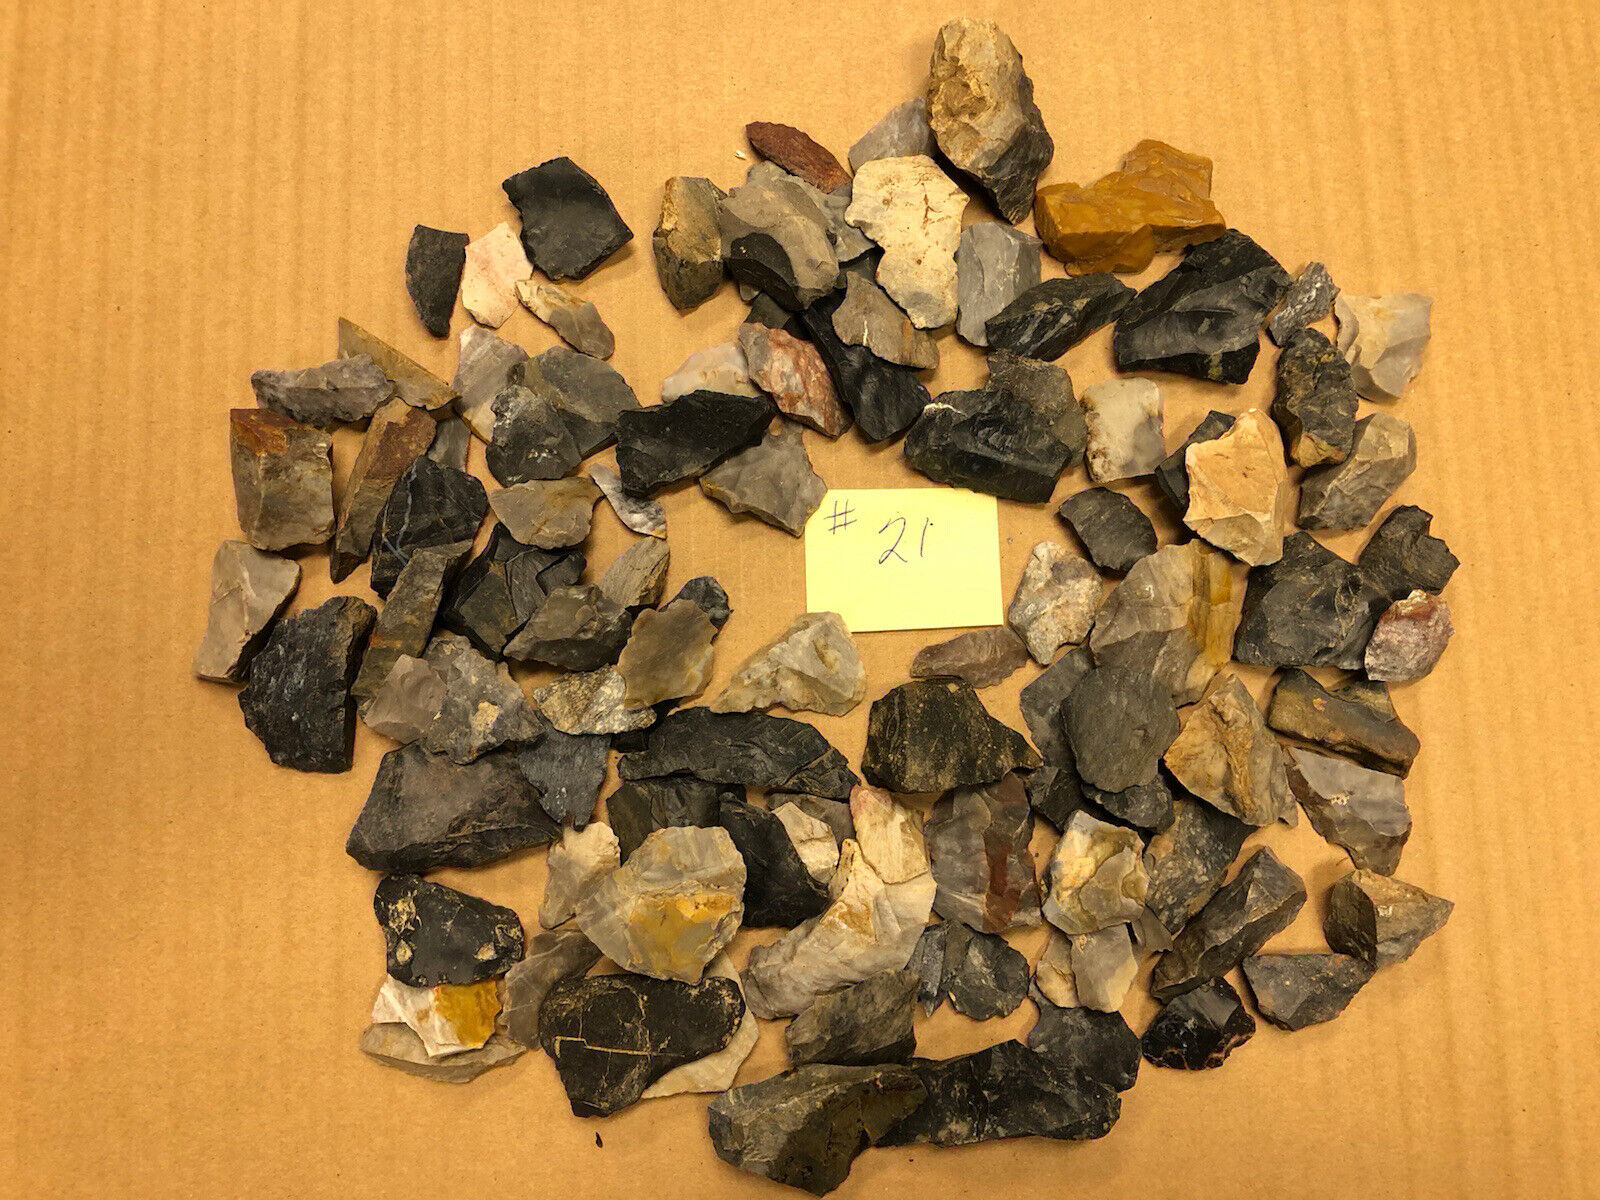 Lot # 21-# 27 Two Pounds Of Ohio Flint Various Colors/Sizes/Types